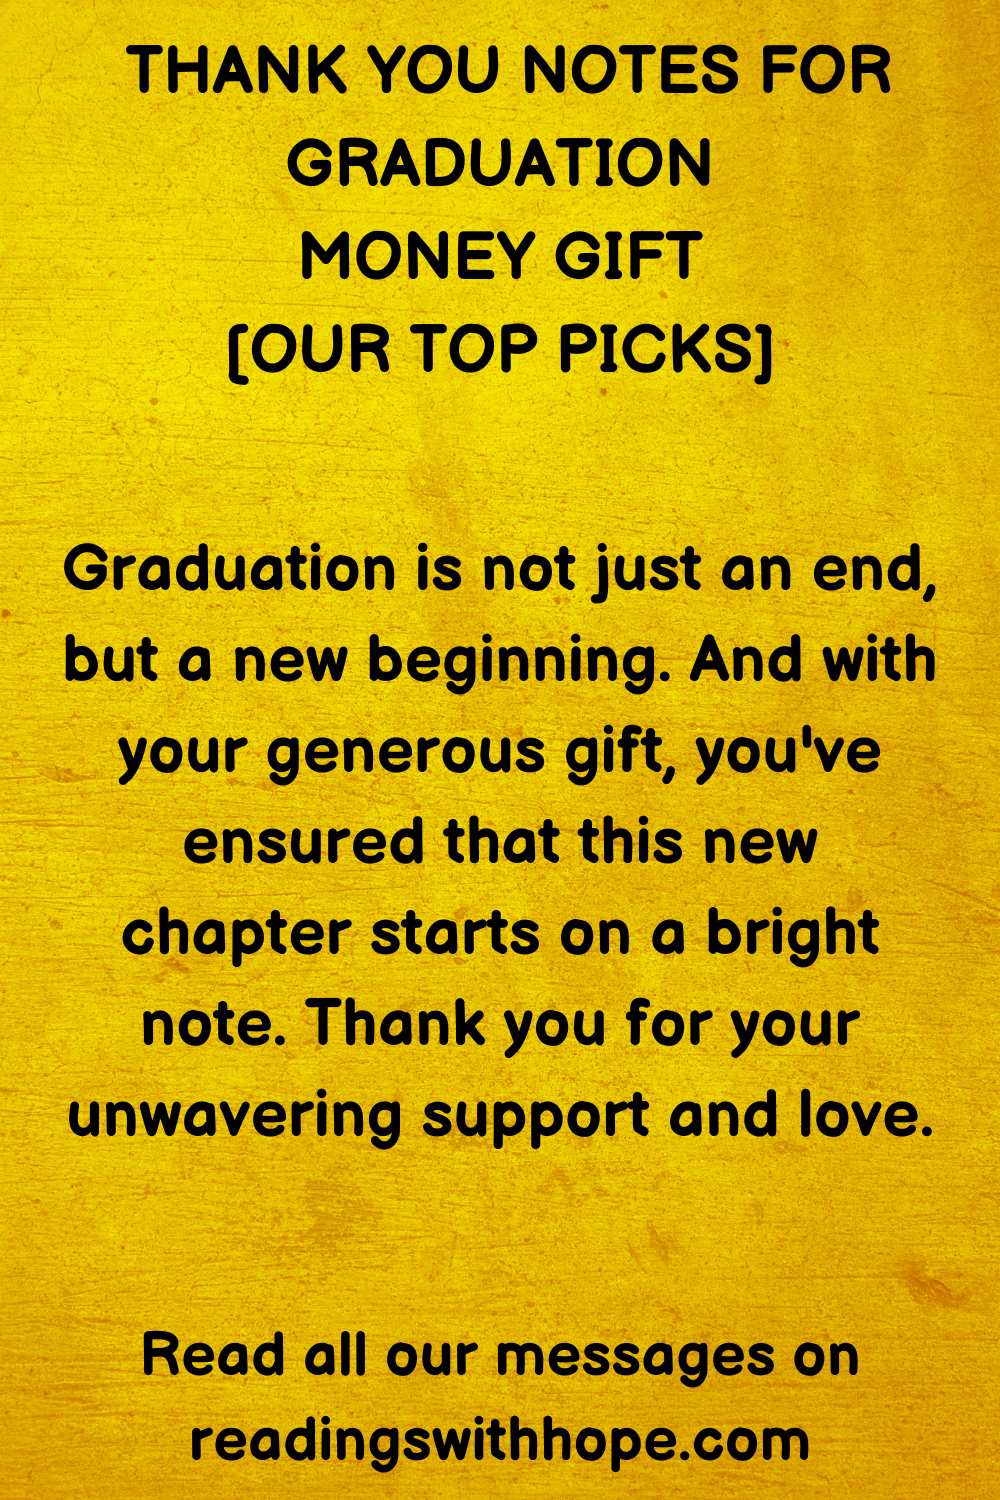 Thank You Note for Graduation Money Gift